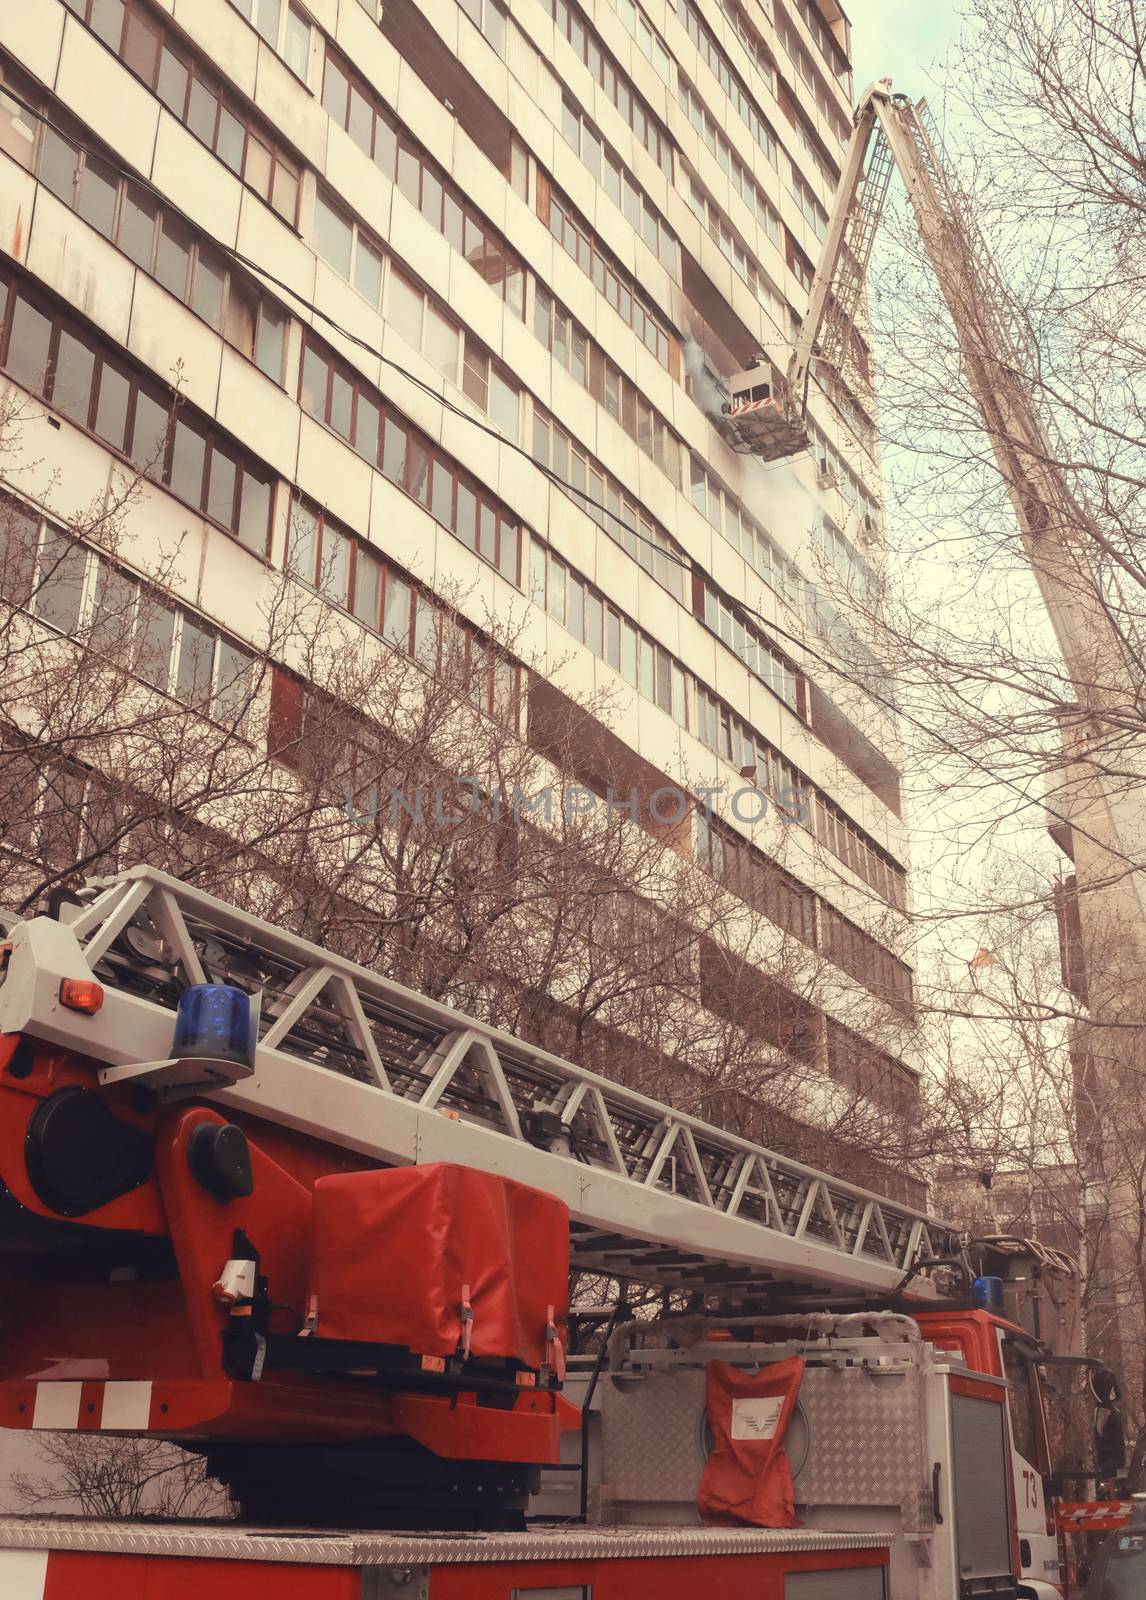 Fire in a multi-storey building by fifg